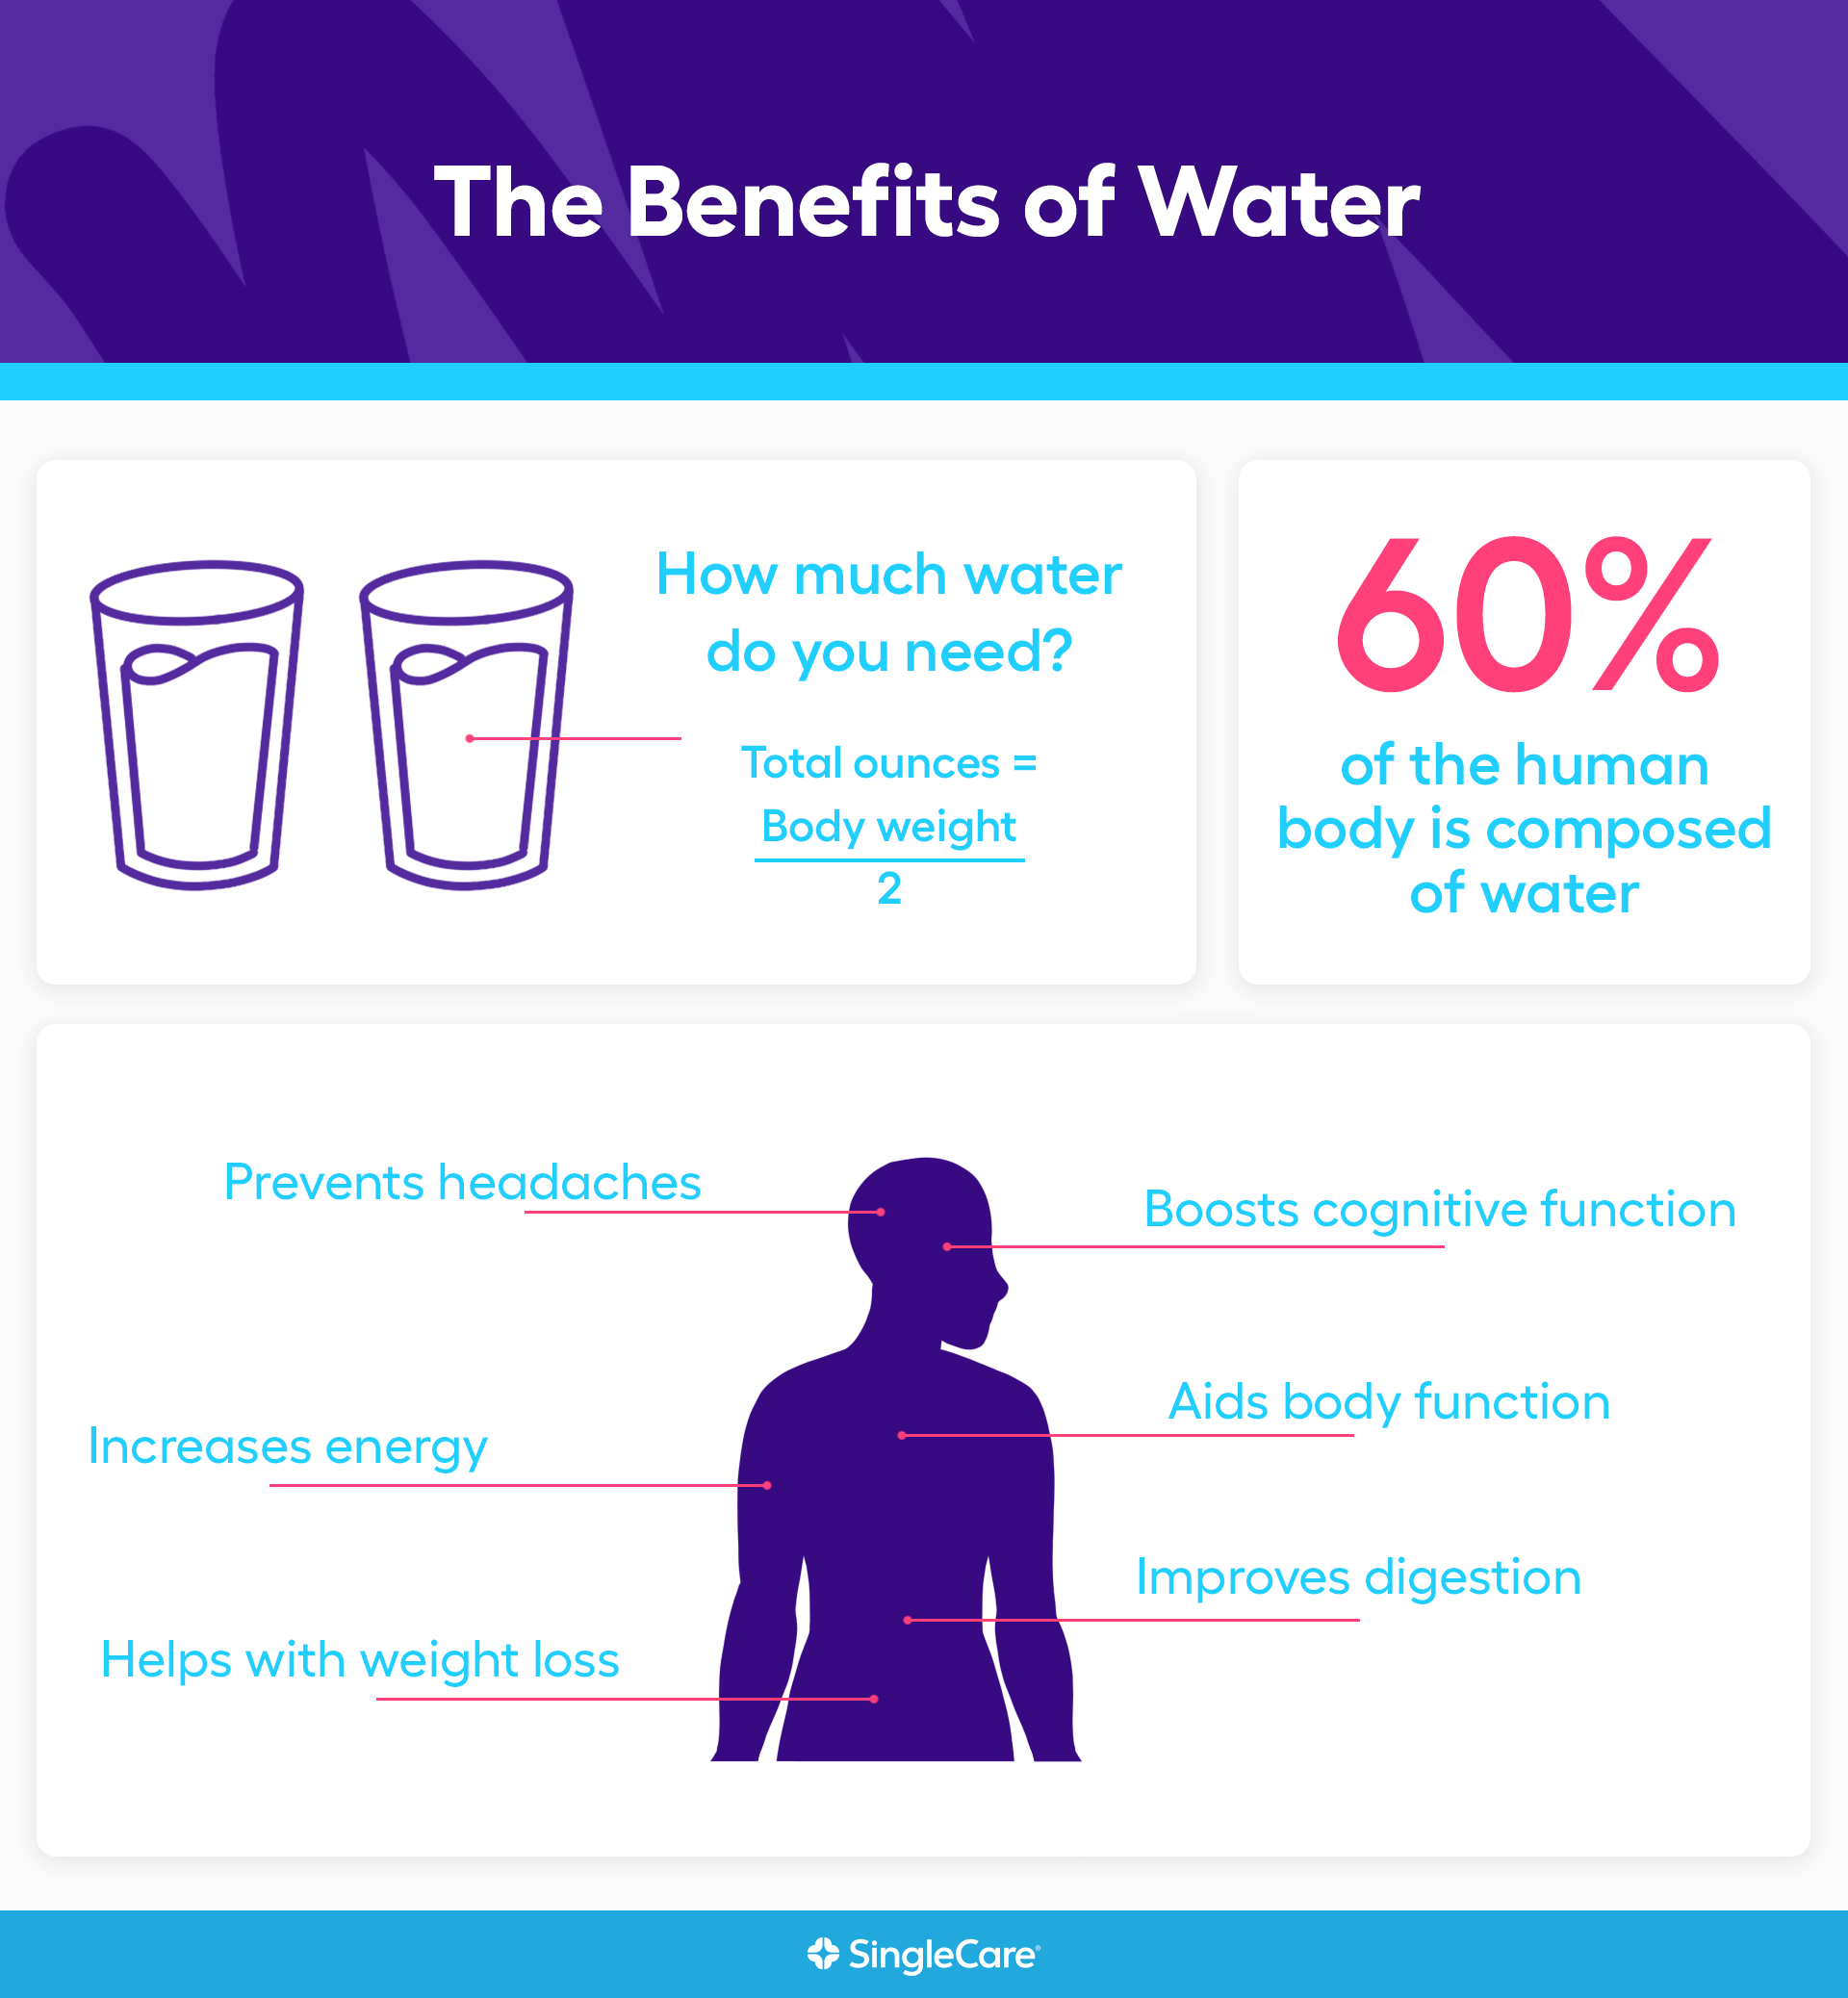 An infographic on the benefits of drinking water